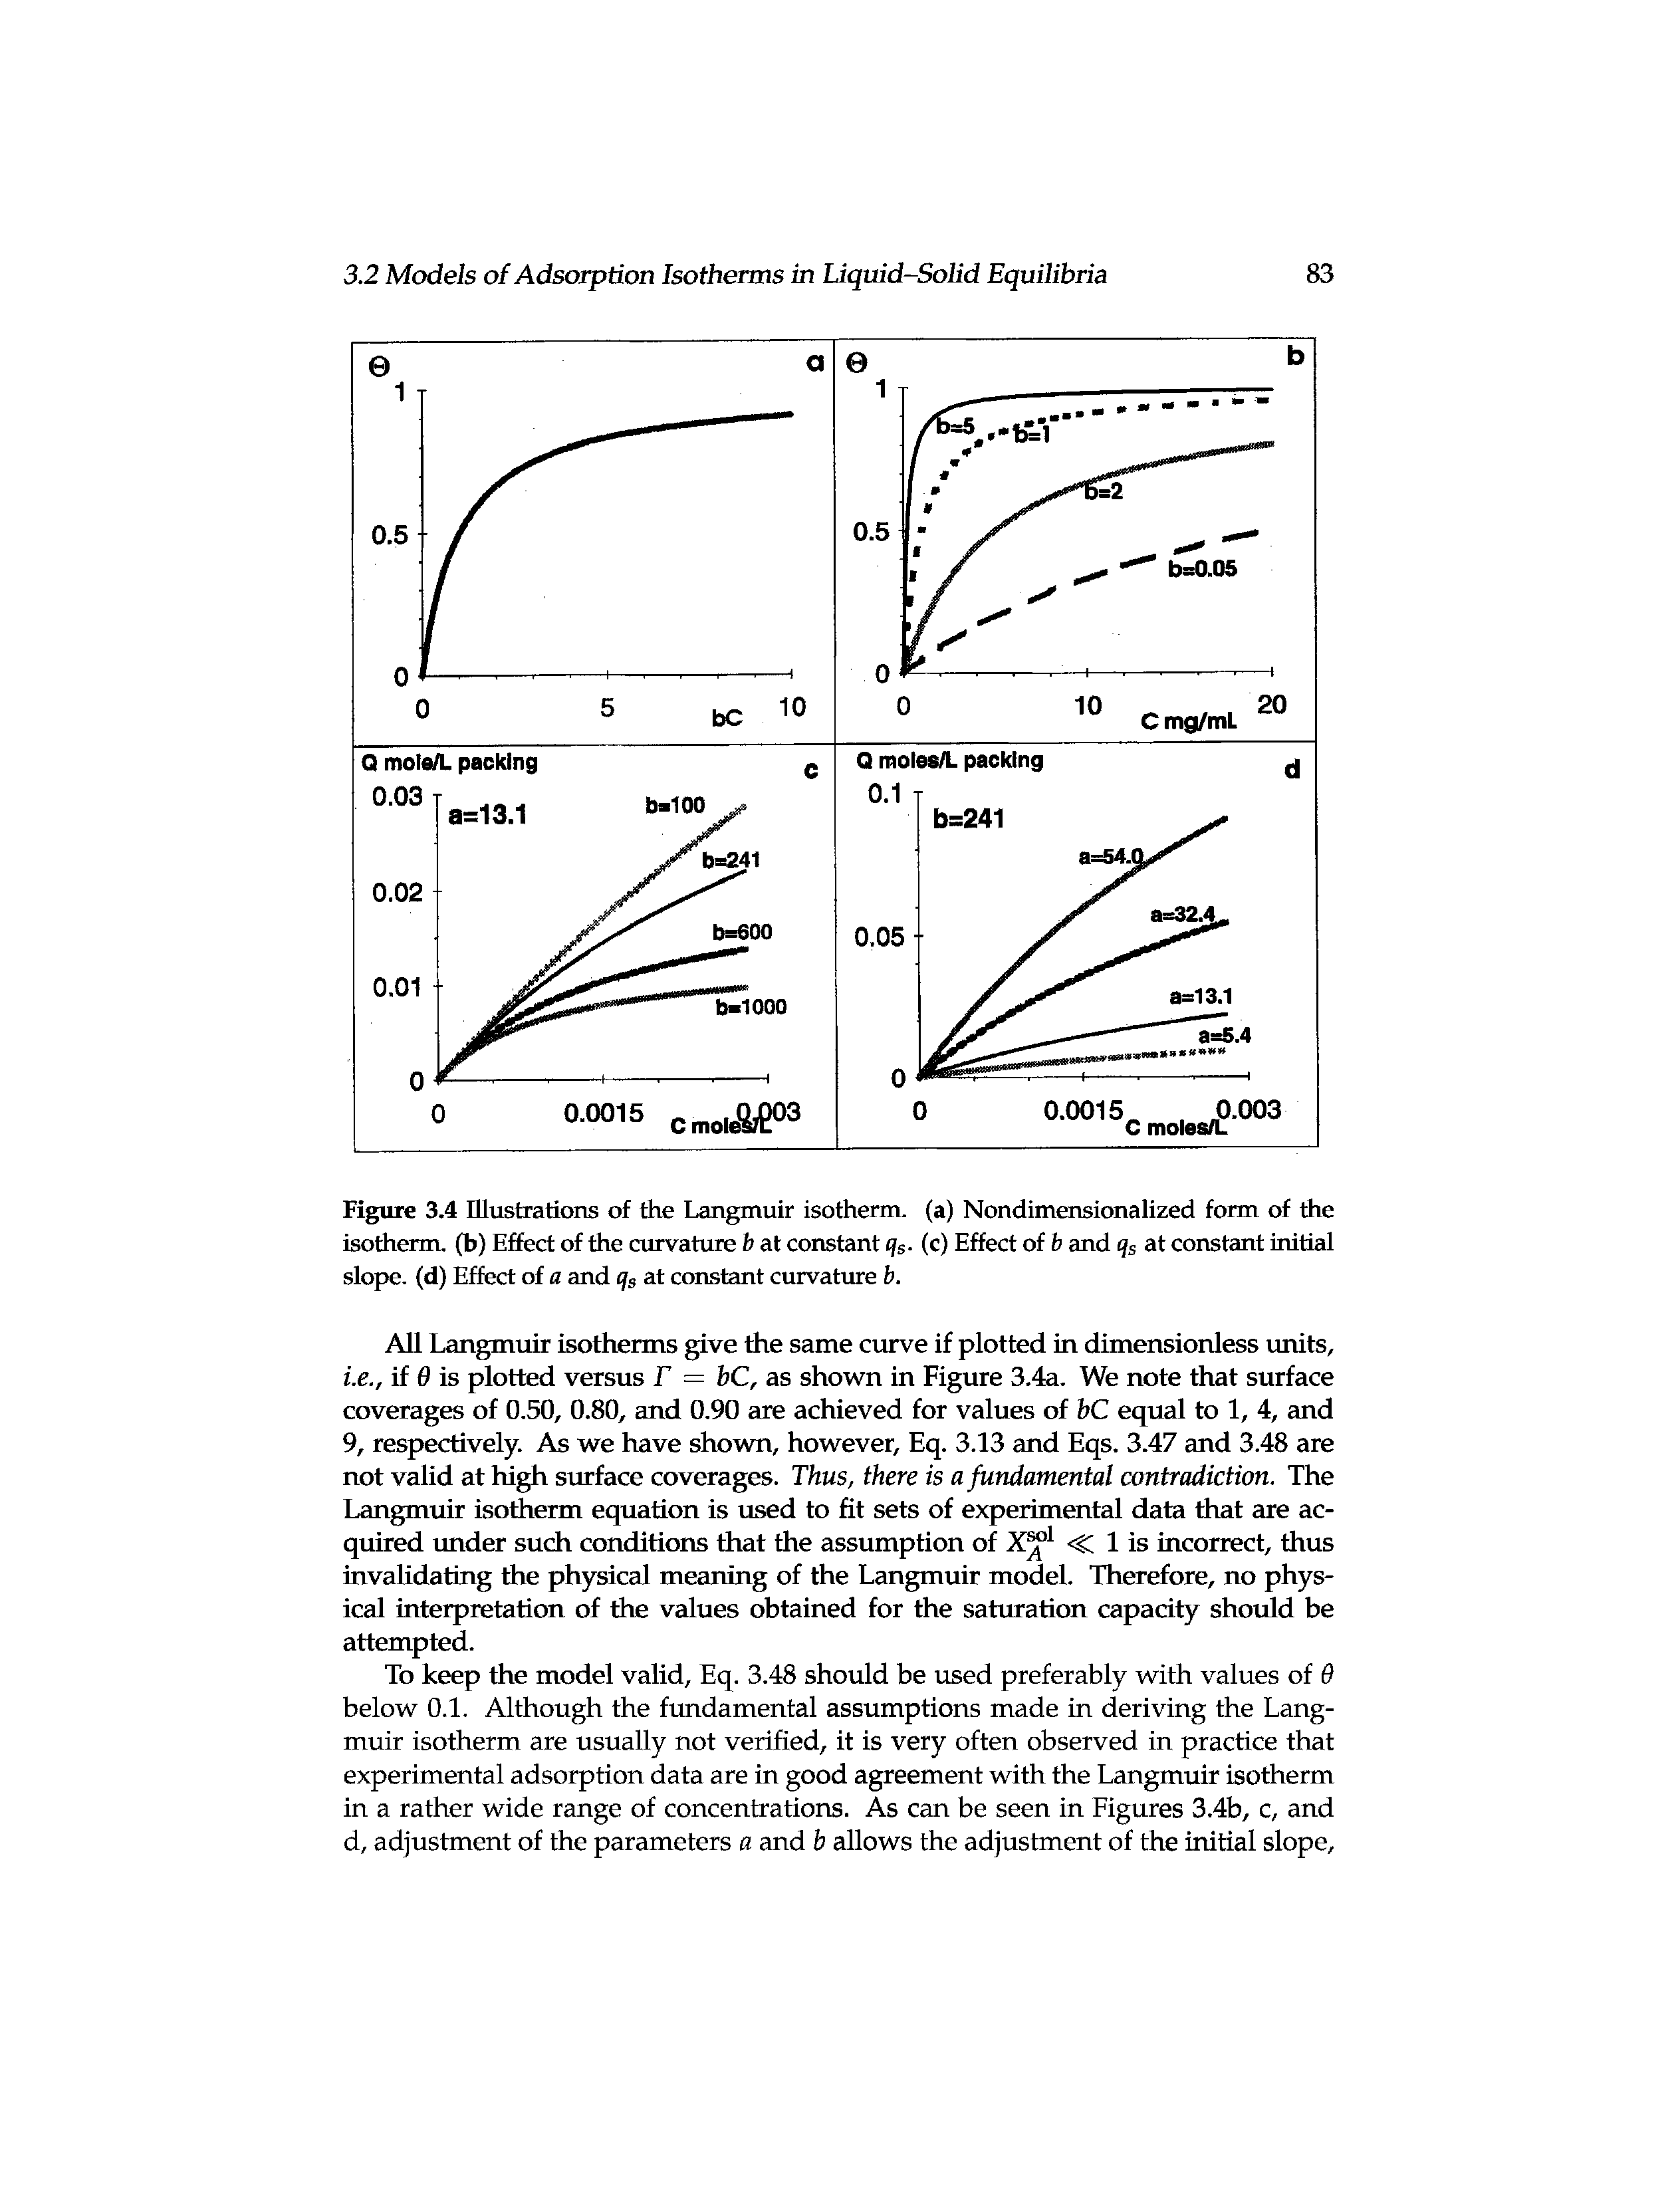 Figure 3.4 Illustrations of the Langmuir isotherm, (a) Nondimensionalized form of the isotherm, (b) Effect of the curvature b at constant <js- (c) Effect of h and qs at constant initial slope, (d) Effect of a and qs at constant curvature b.